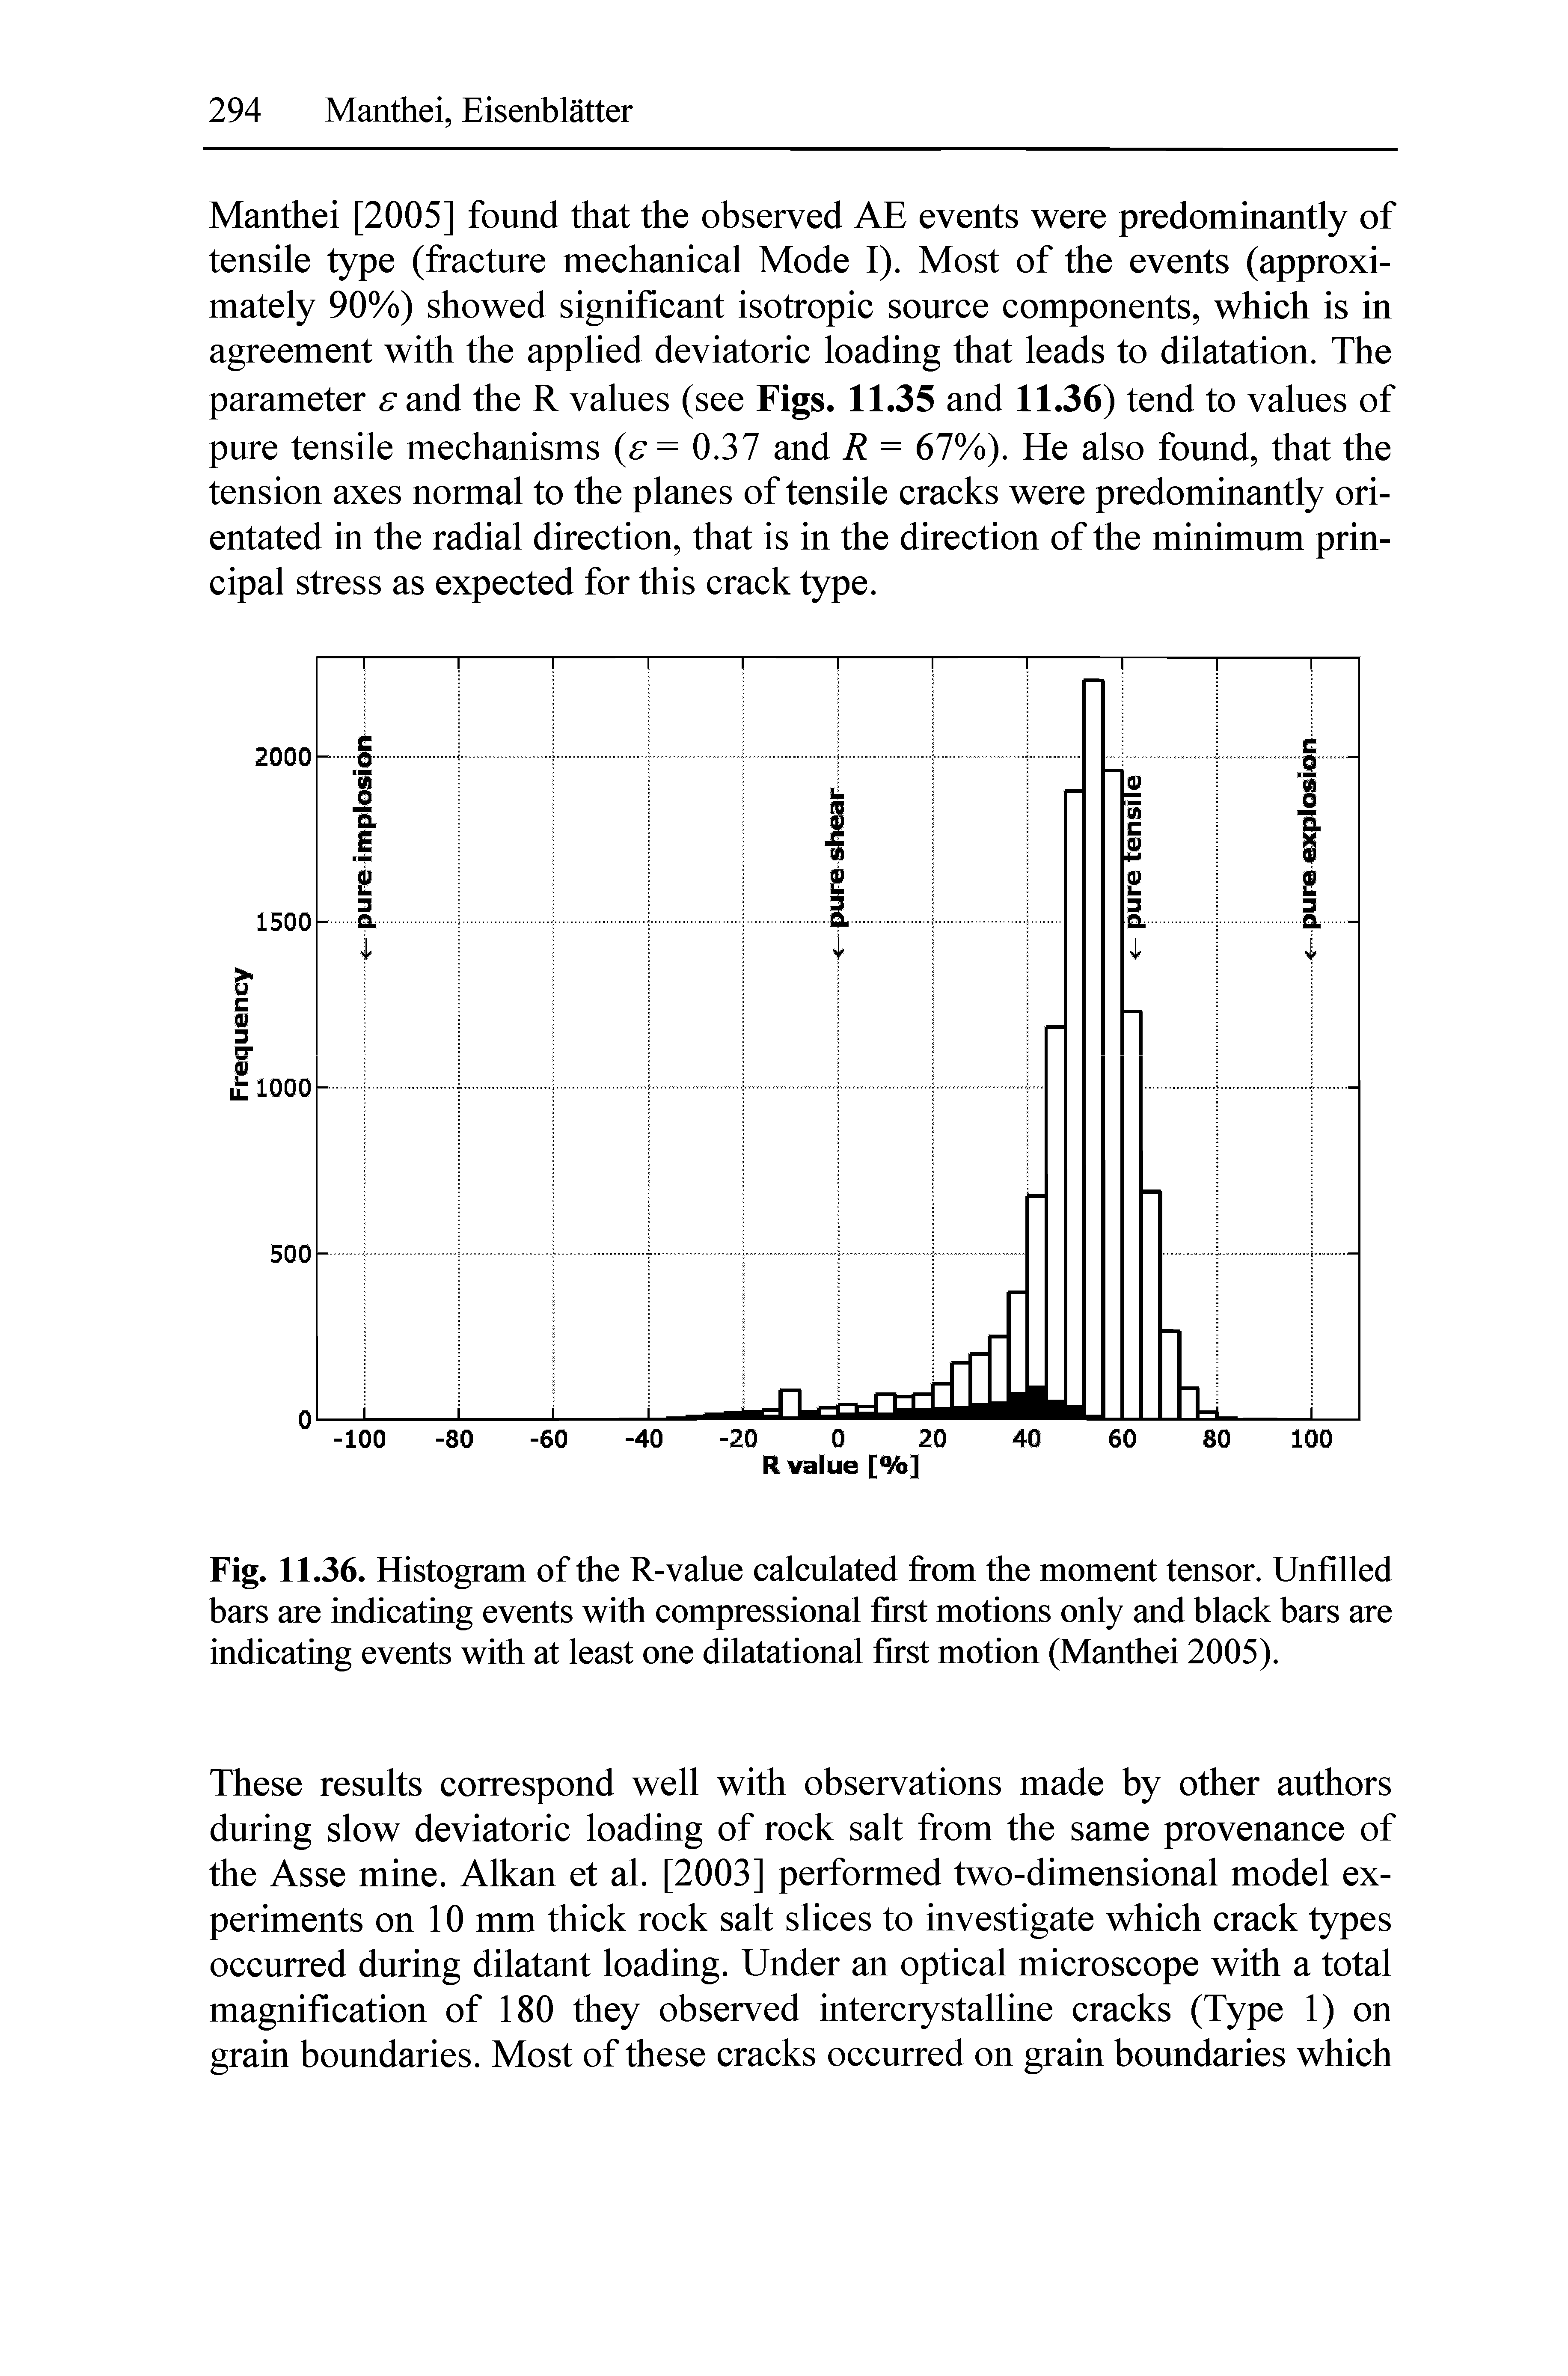 Fig. 11.36. Histogram of the R-value calculated from the moment tensor. Unfilled bars are indicating events with compressional first motions only and black bars are indicating events with at least one dilatational first motion (Manthei 2005).